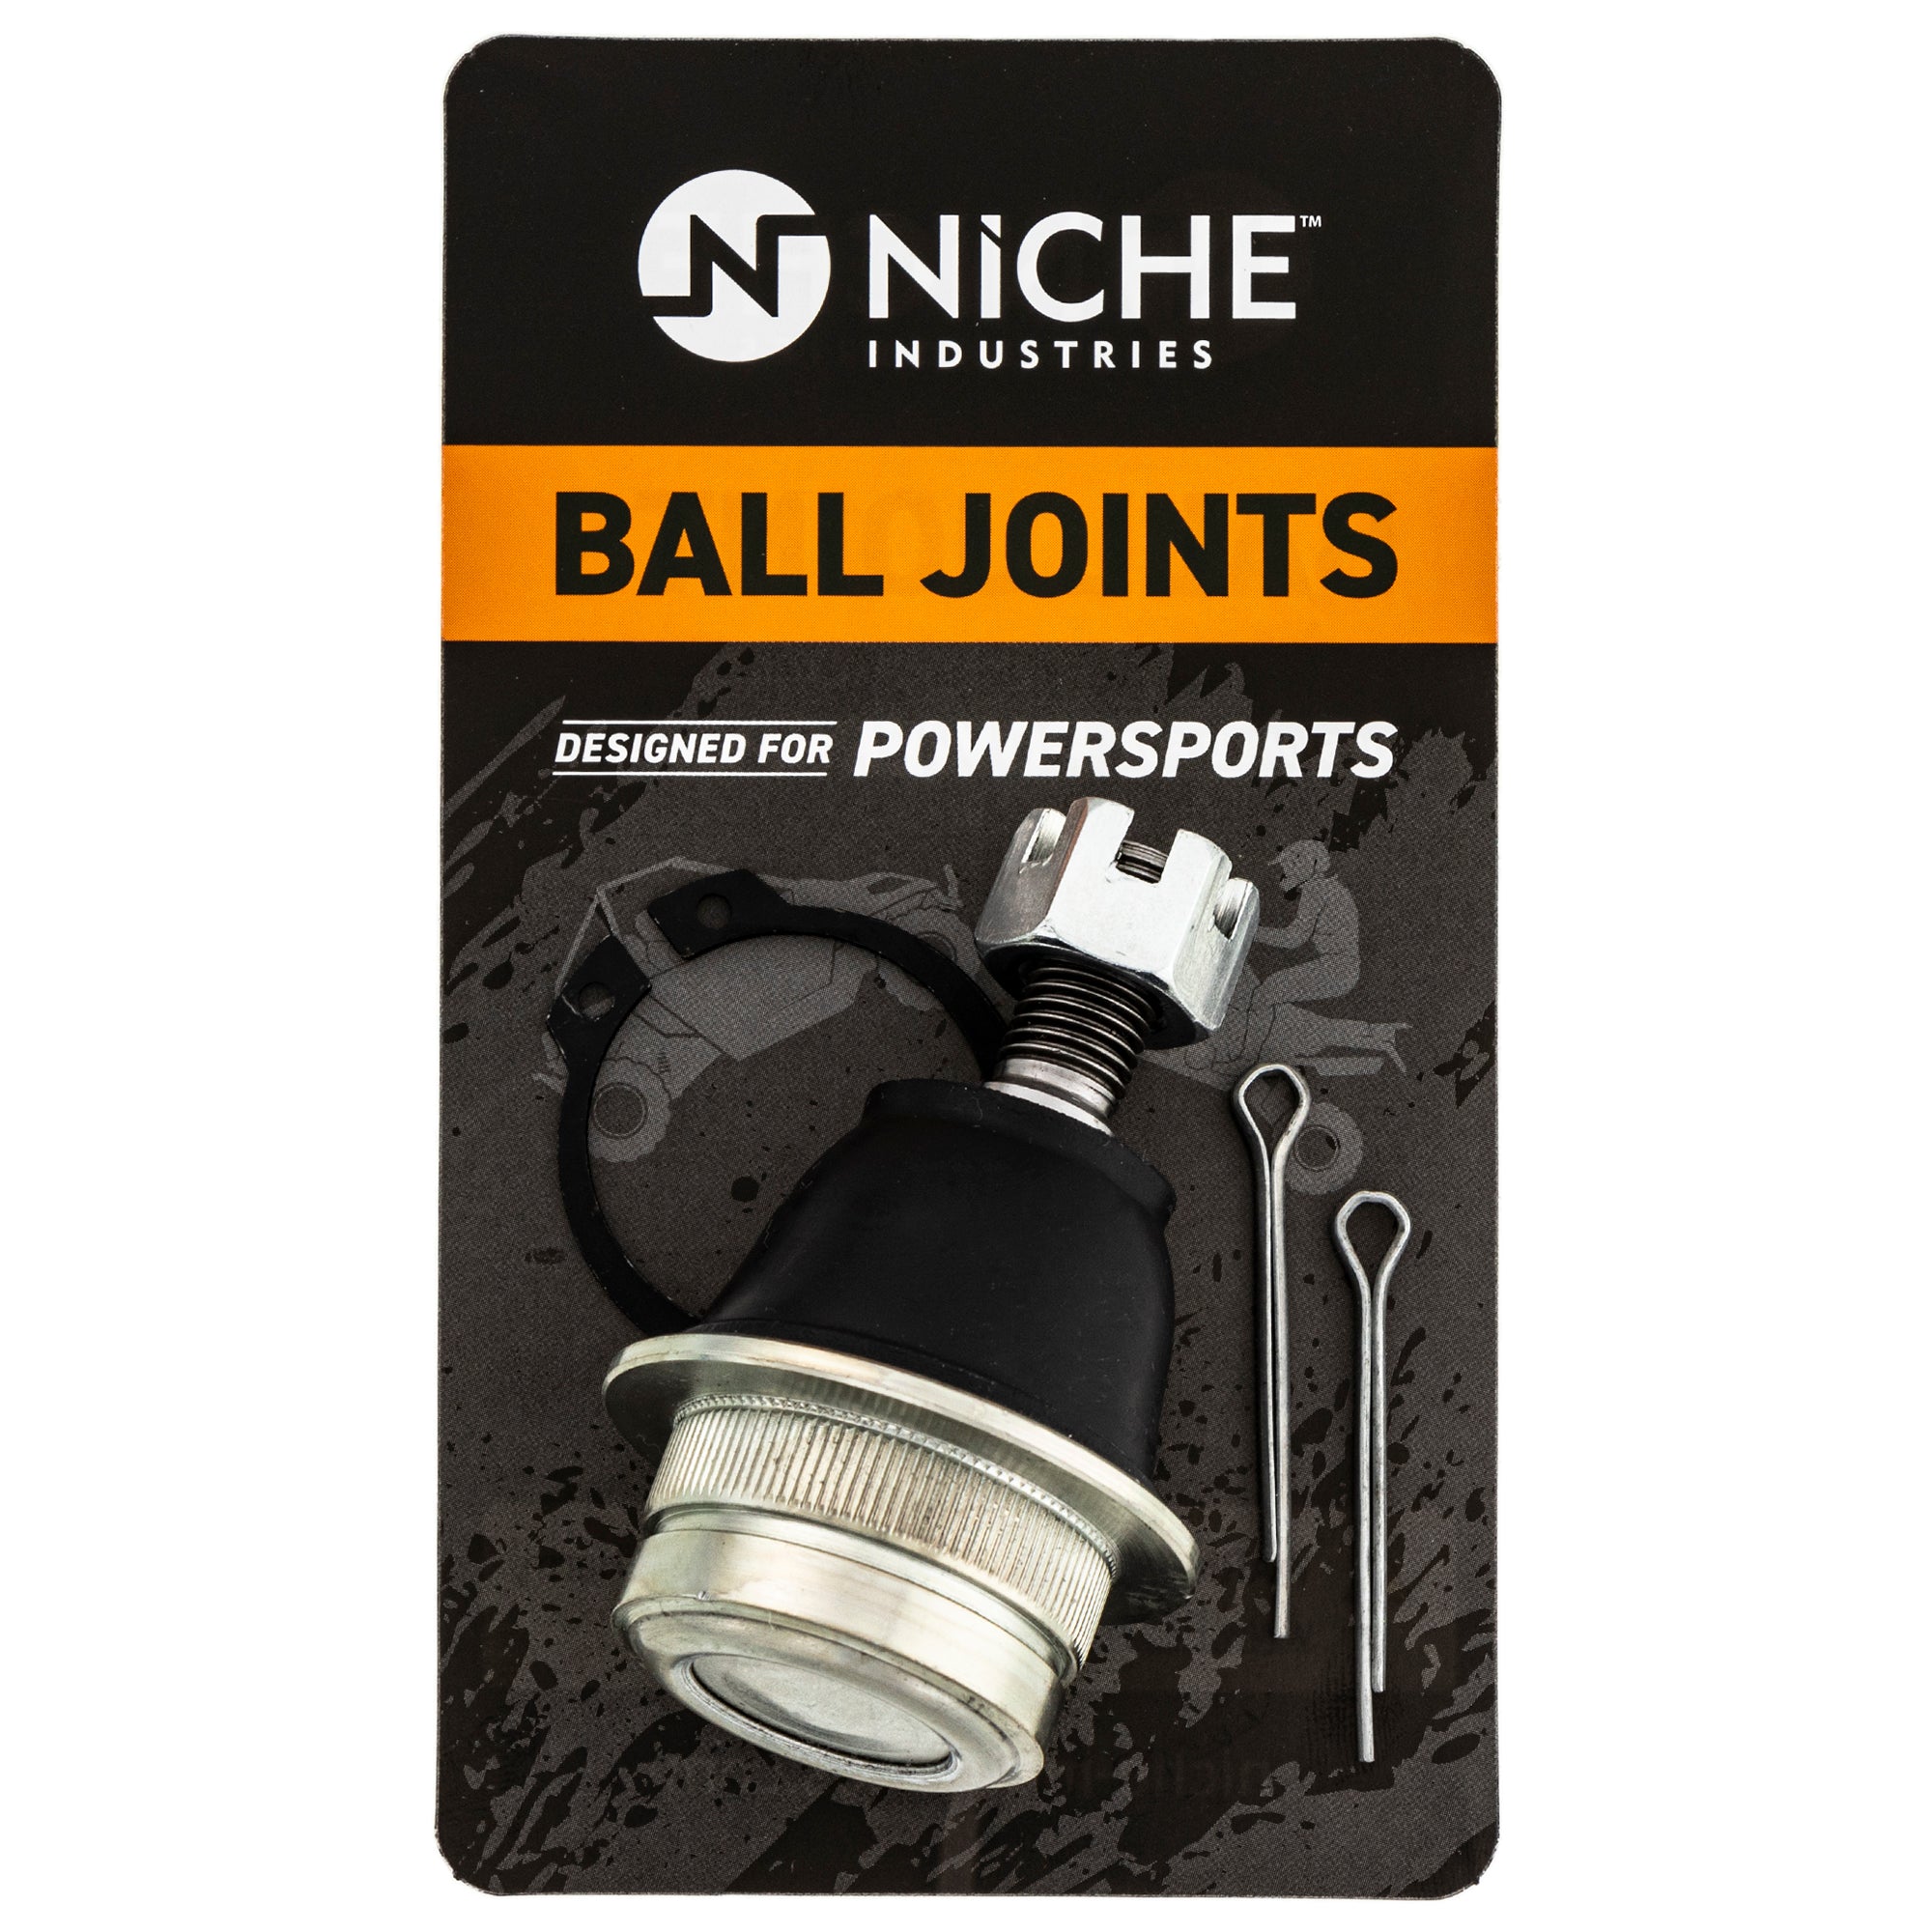 NICHE 519-CBJ2237T Ball Joint 4-Pack for Western Power Sports